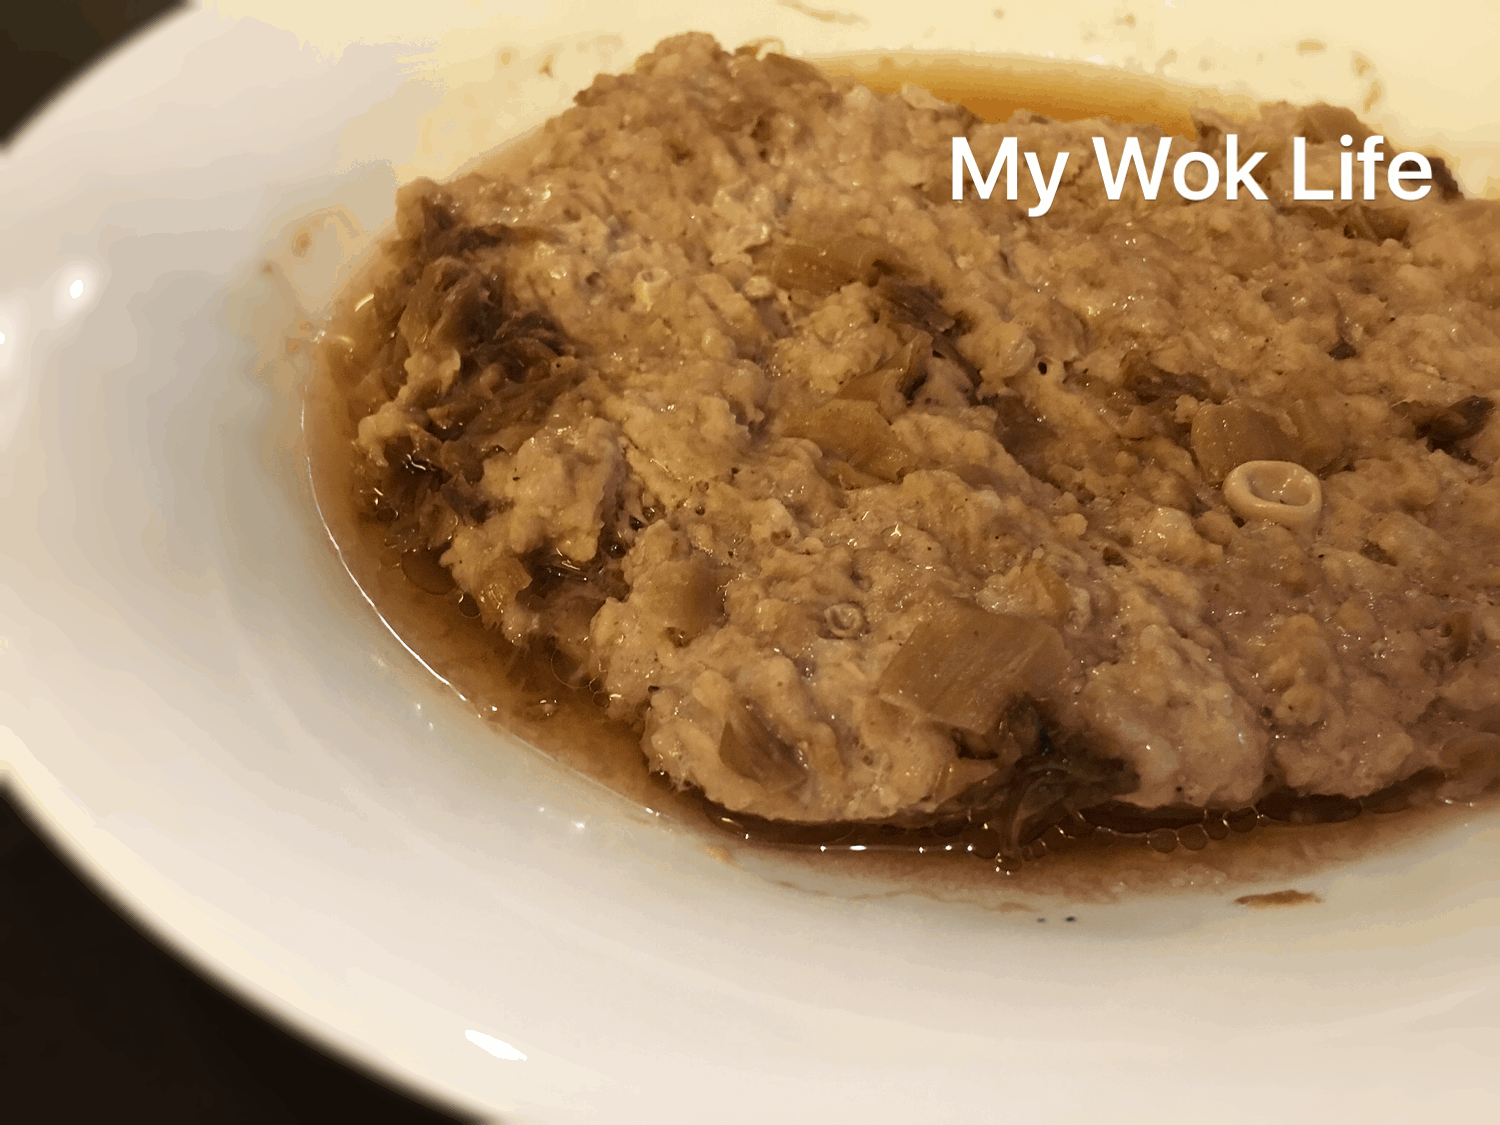 My Wok Life Cooking Blog Steamed Minced Pork with Mei Cai (Preserved Vegetable) 梅菜蒸肉饼